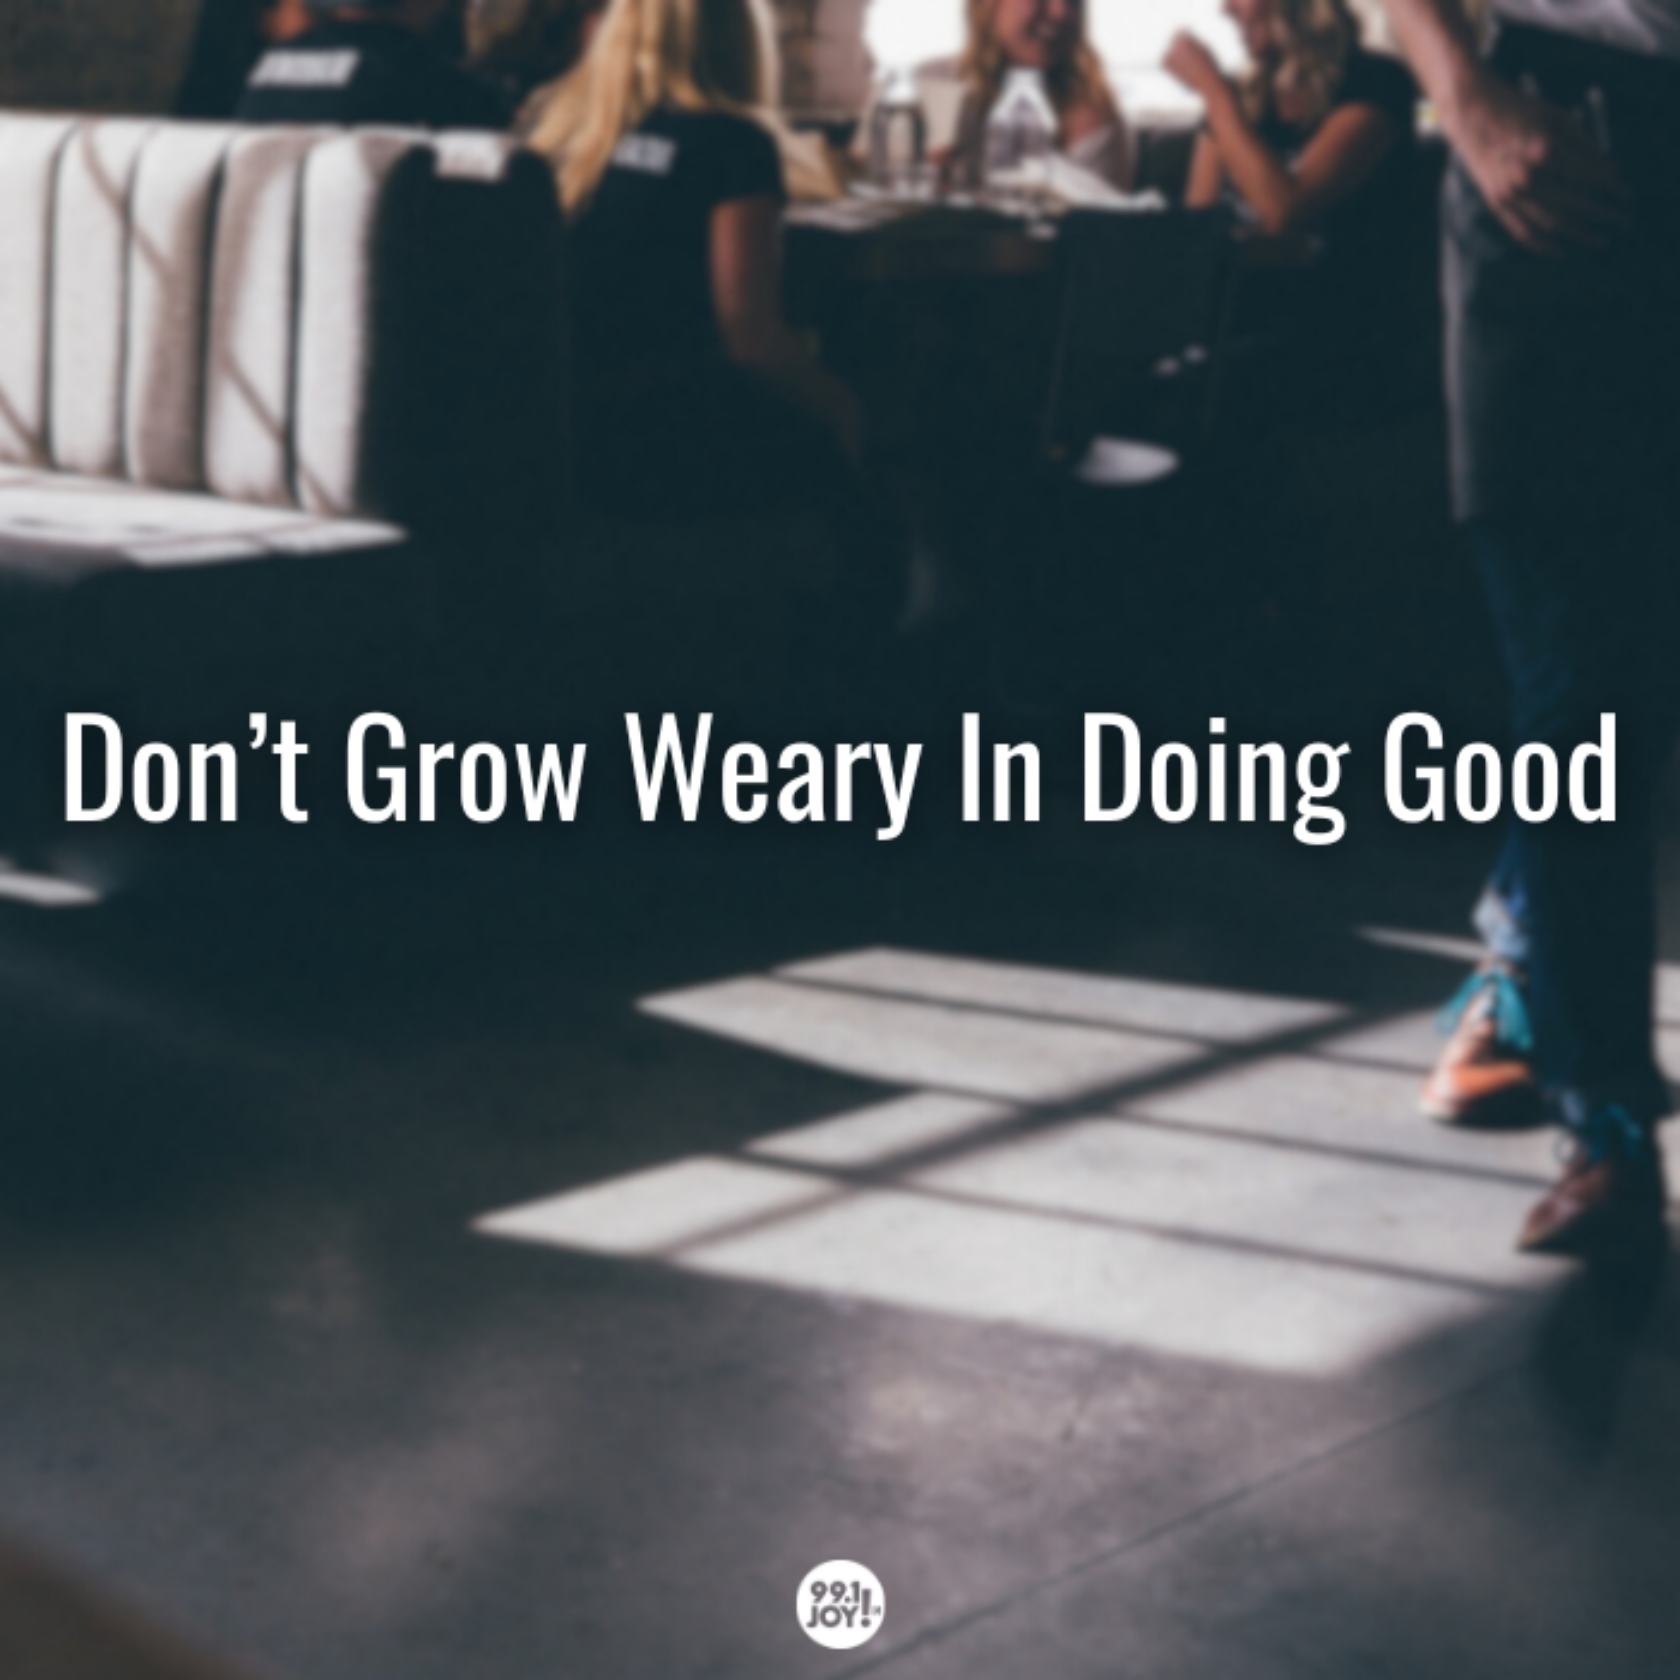 Don’t Grow Weary In Doing Good